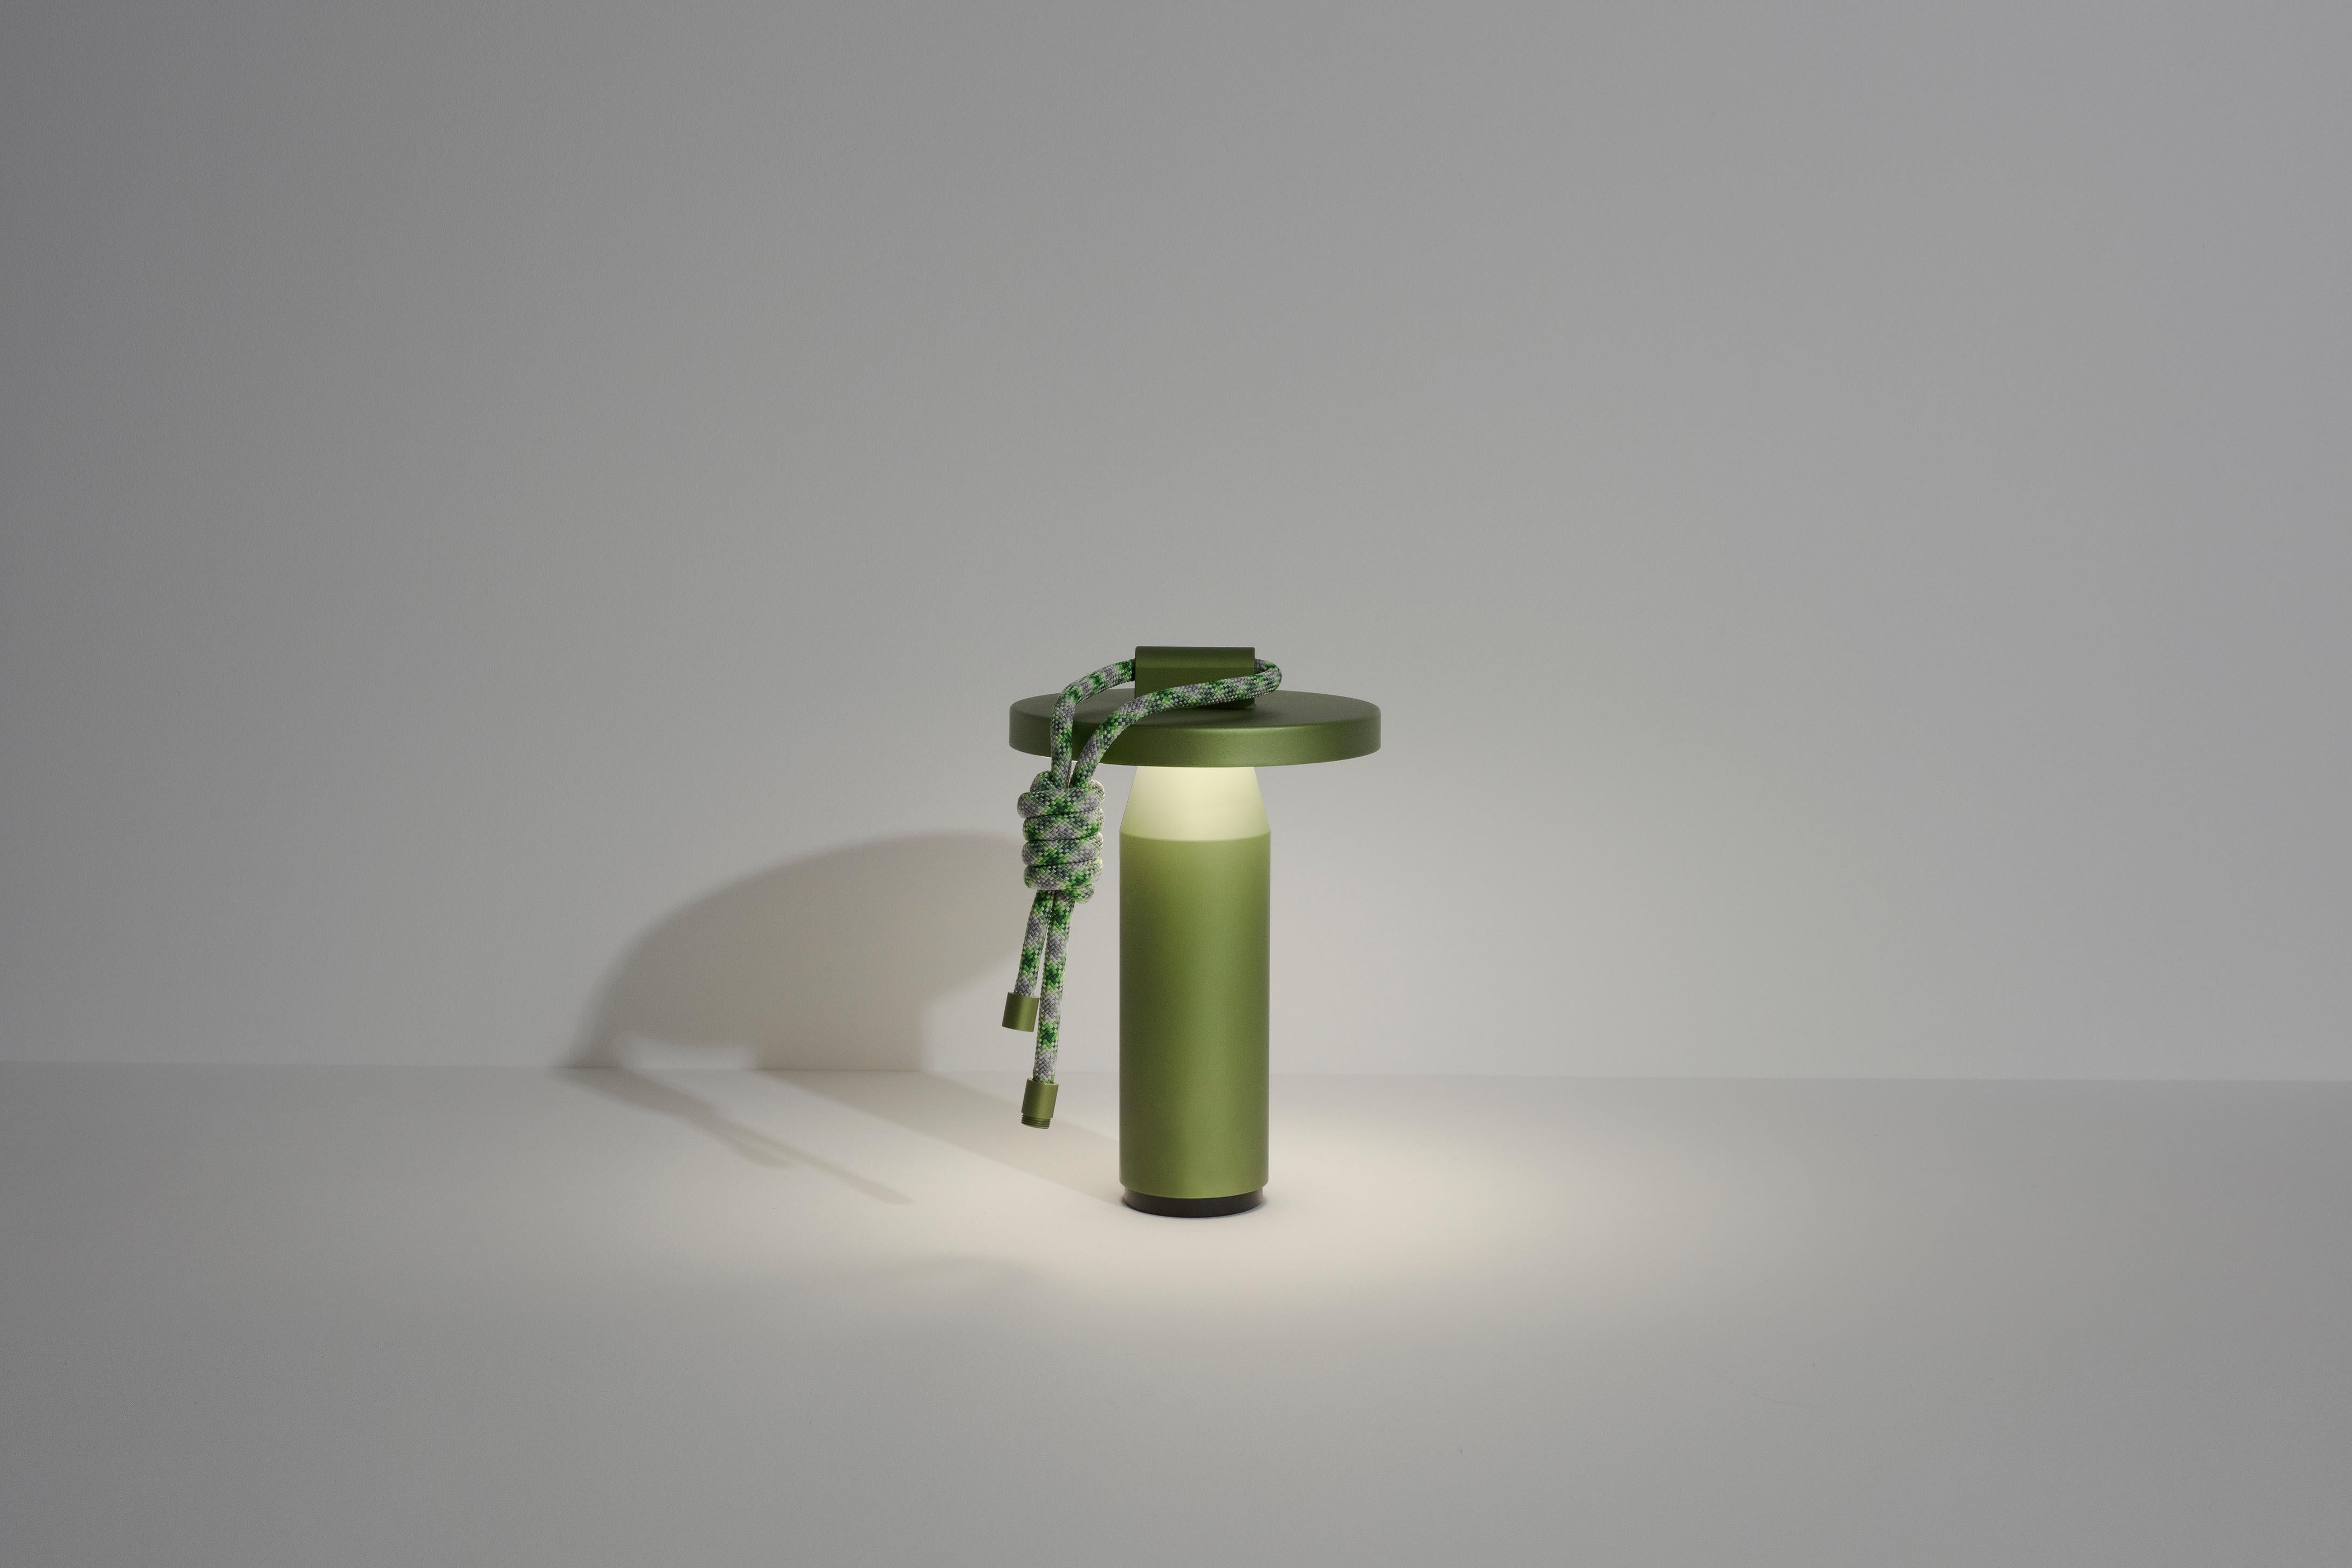 Contemporary Petite Friture Quasar Portable Table Lamp in Olive Green Aluminium by Samy Rio For Sale